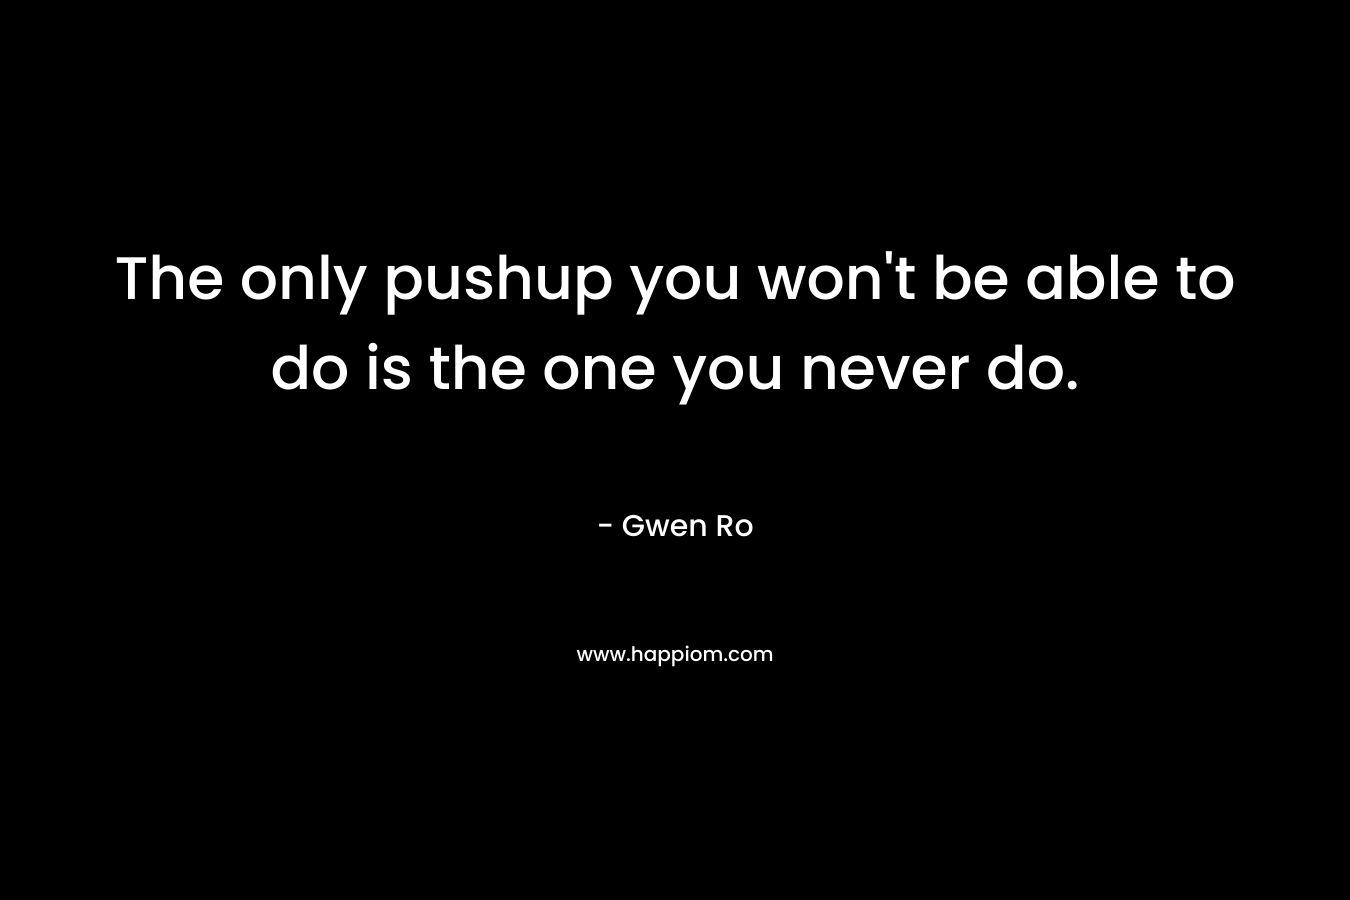 The only pushup you won't be able to do is the one you never do.